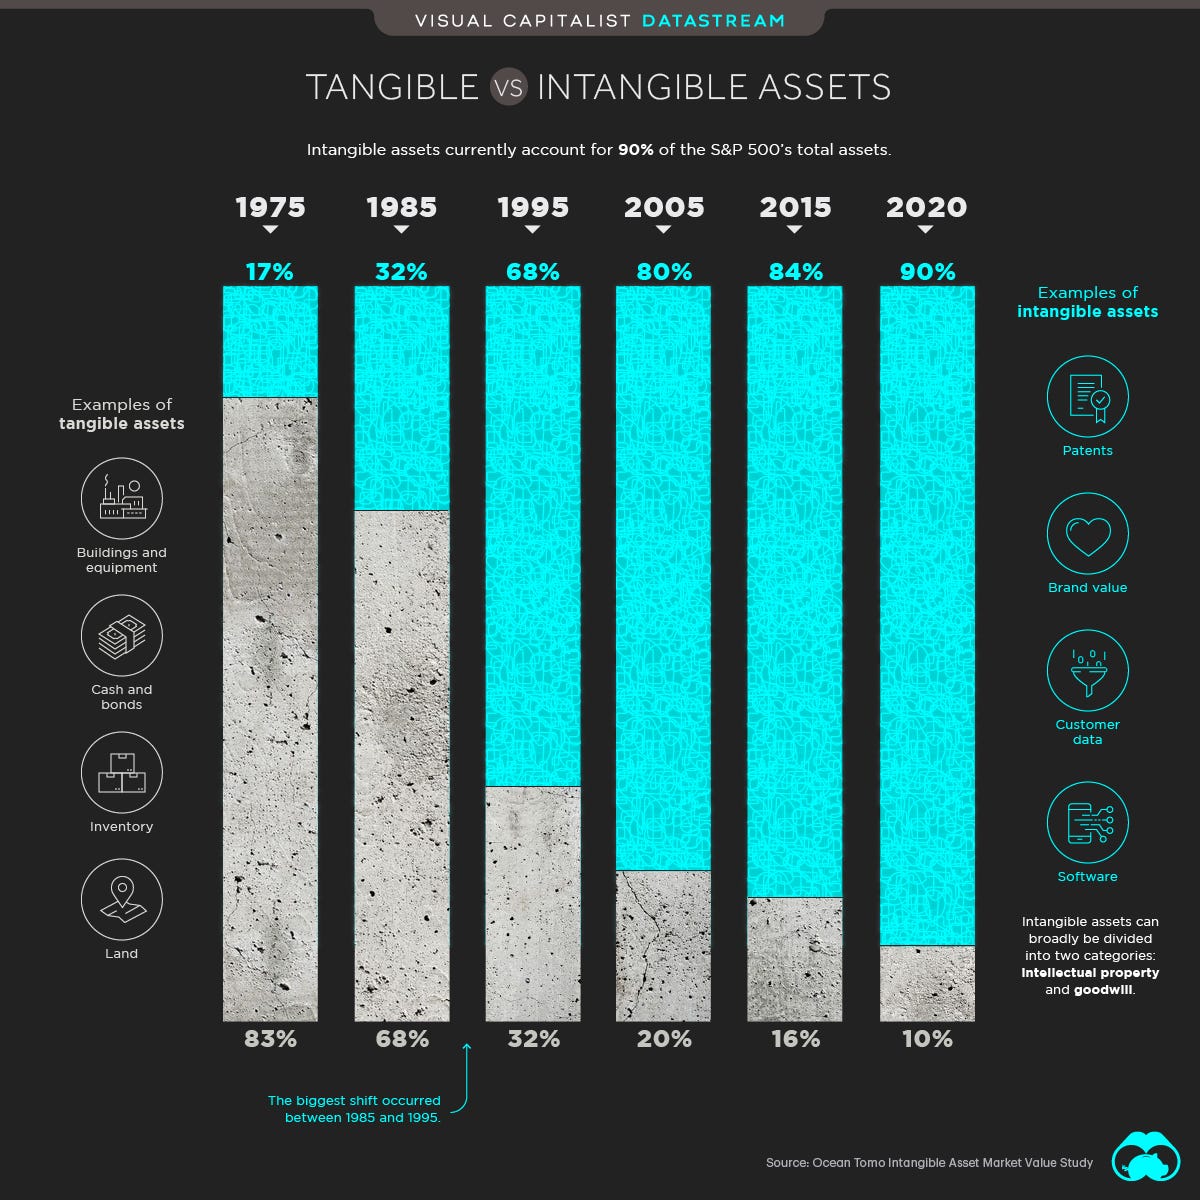 Tangible vs intangible assets in the S&P 500